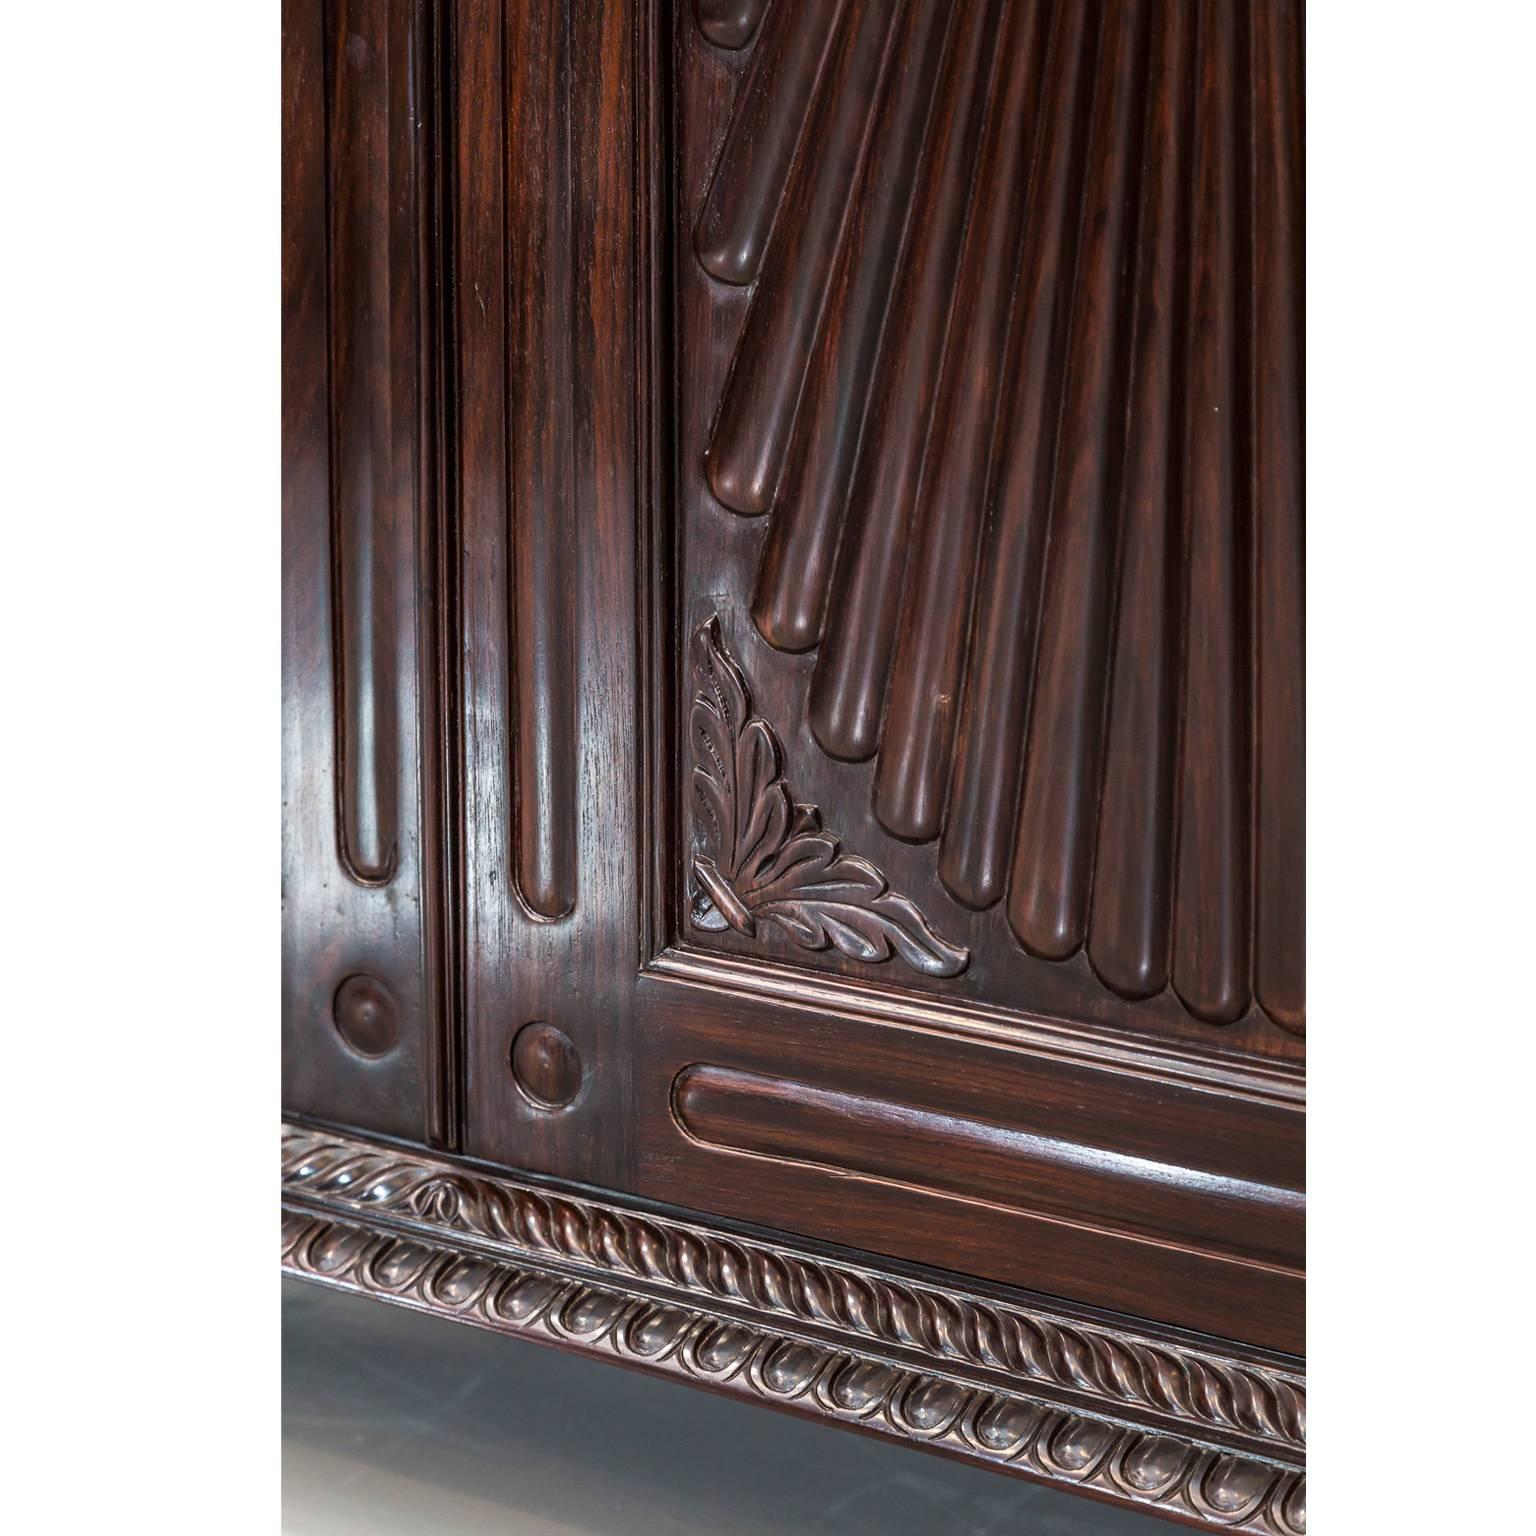 Anglo-Indian or British Colonial Rosewood Cupboard 2